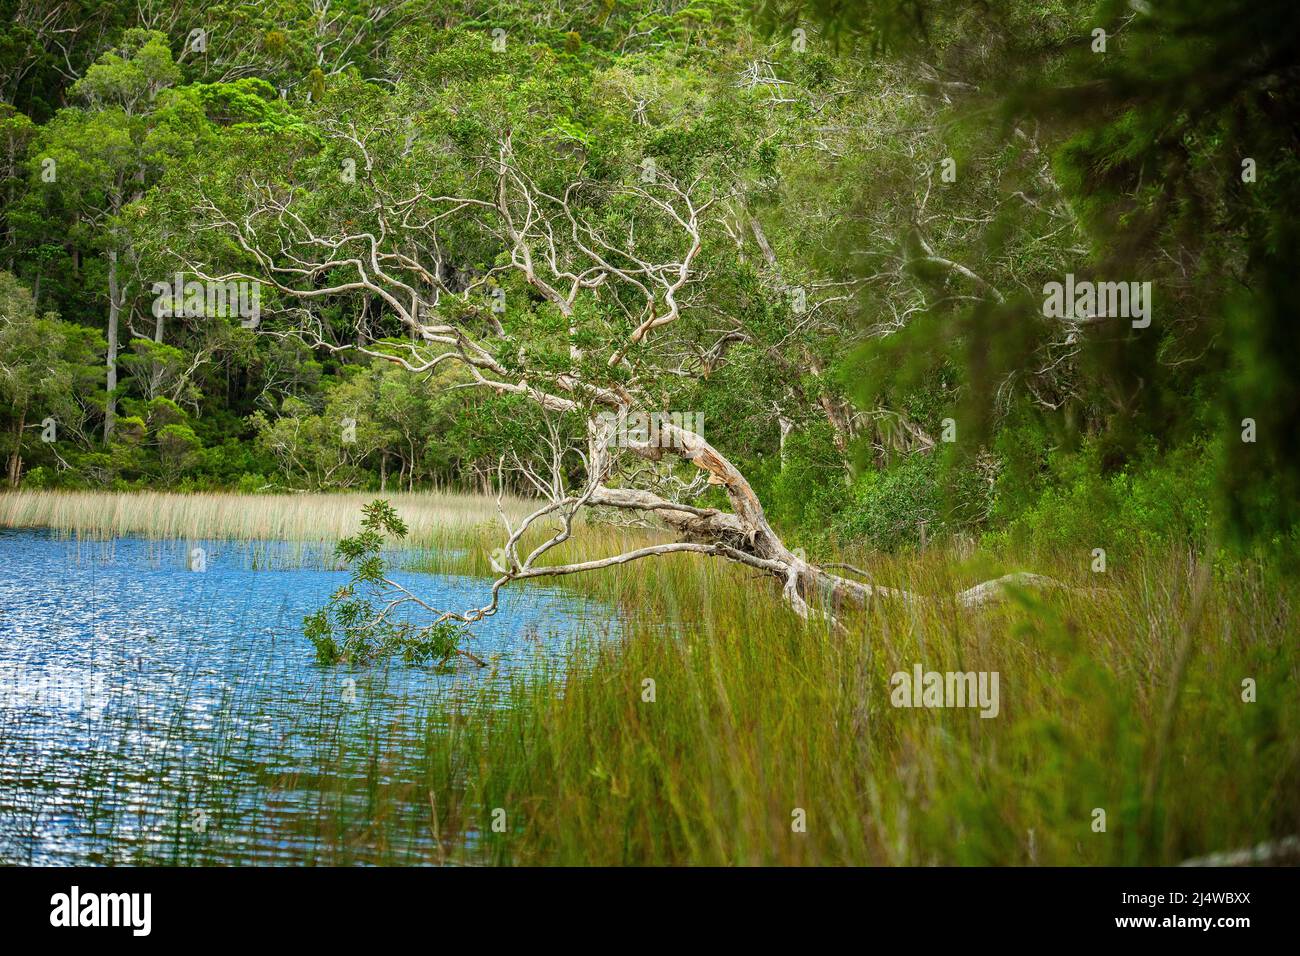 Lake Allom is a sightseers treasure, tucked in a forest of Melaleuca trees (paperbark),  Hoop Pines (Araucaria Cunninghamii), and sedges. Stock Photo